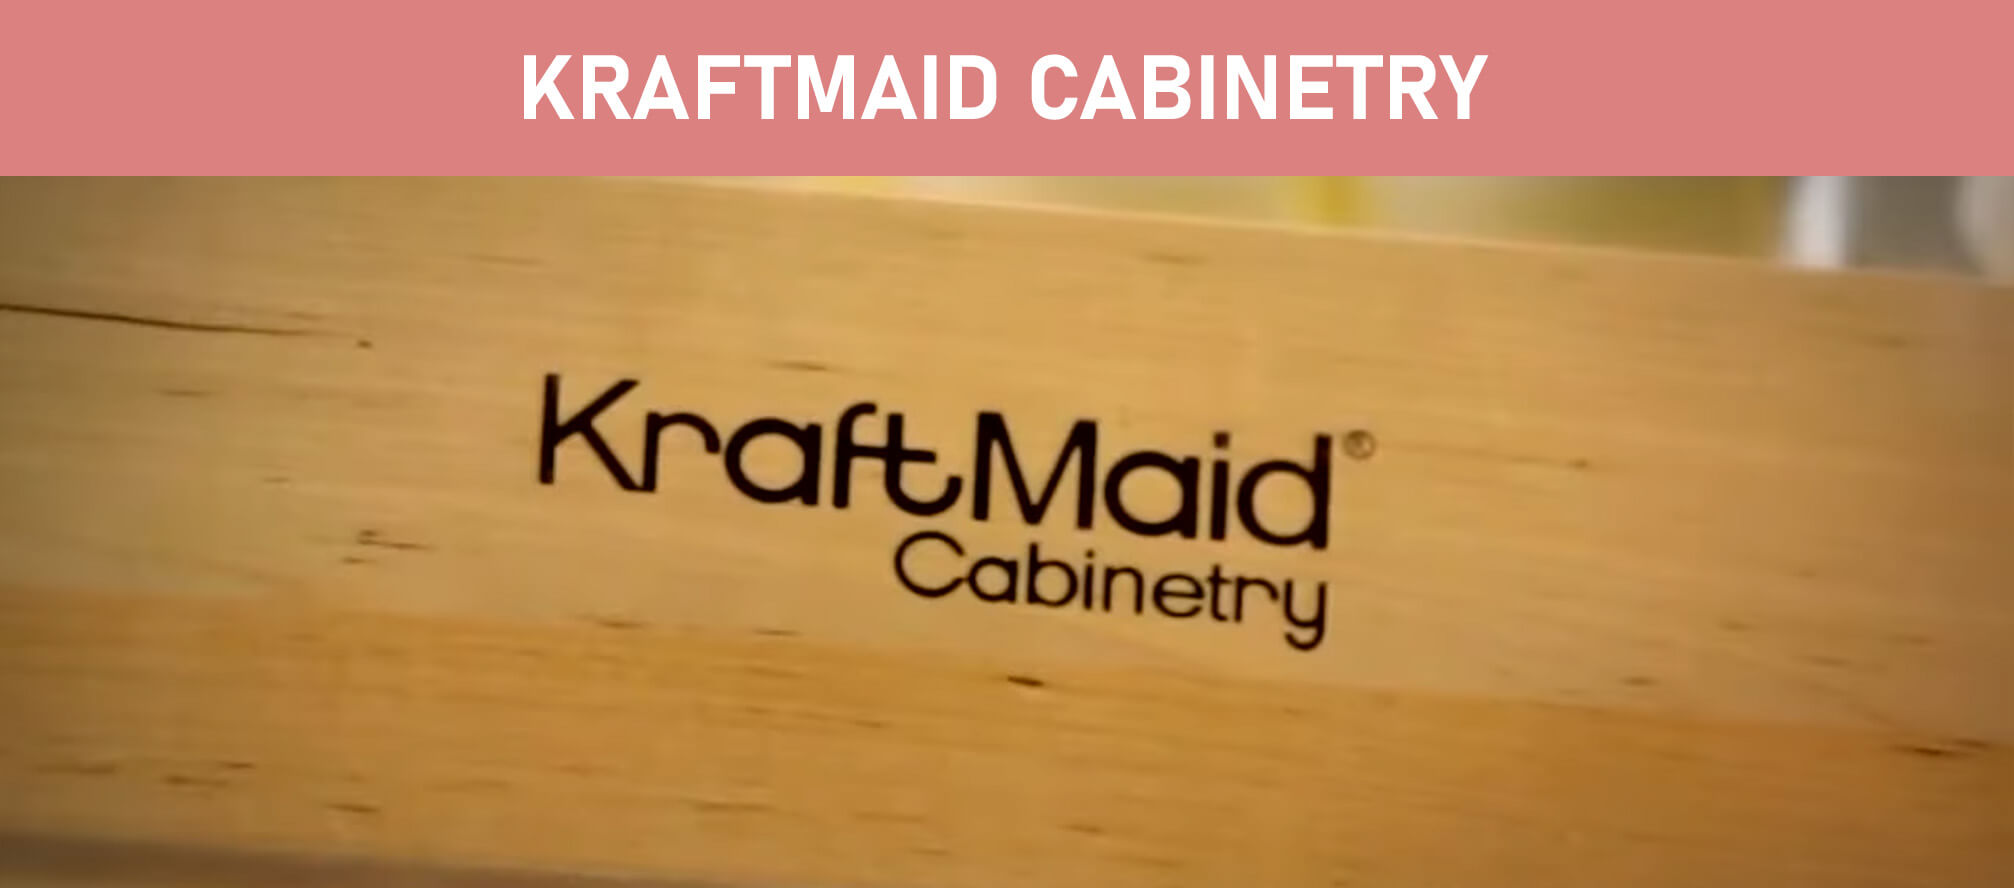 KraftMaid Cabinetry Cabinet Manufacturer Featured image